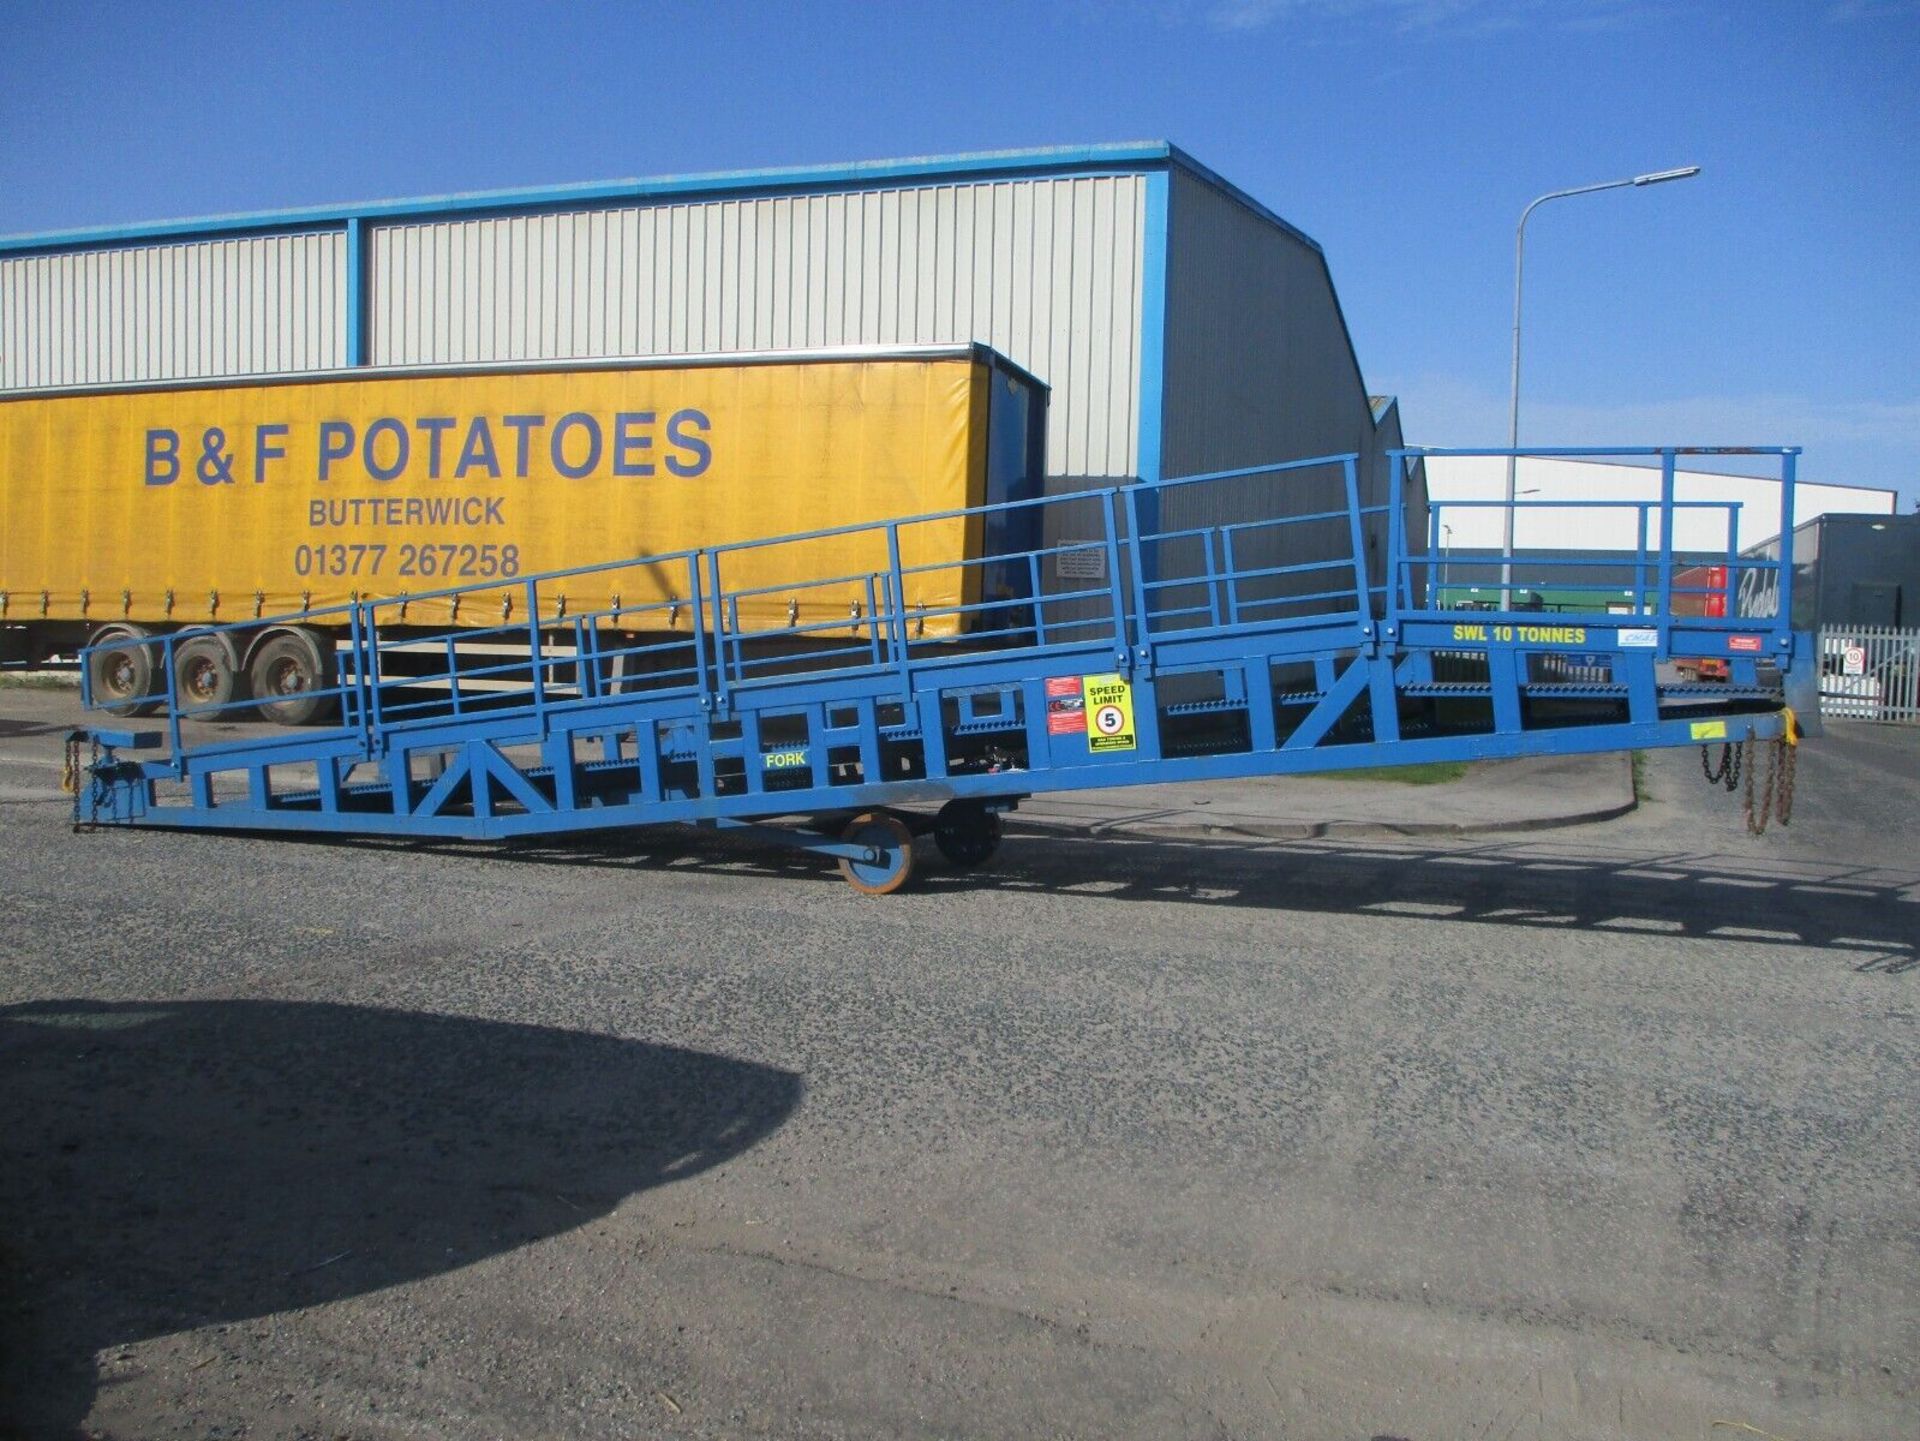 2019 10,000 KG CAPACITY CHASE TITAN 10 CONTAINER LOADING RAMP - Image 10 of 11